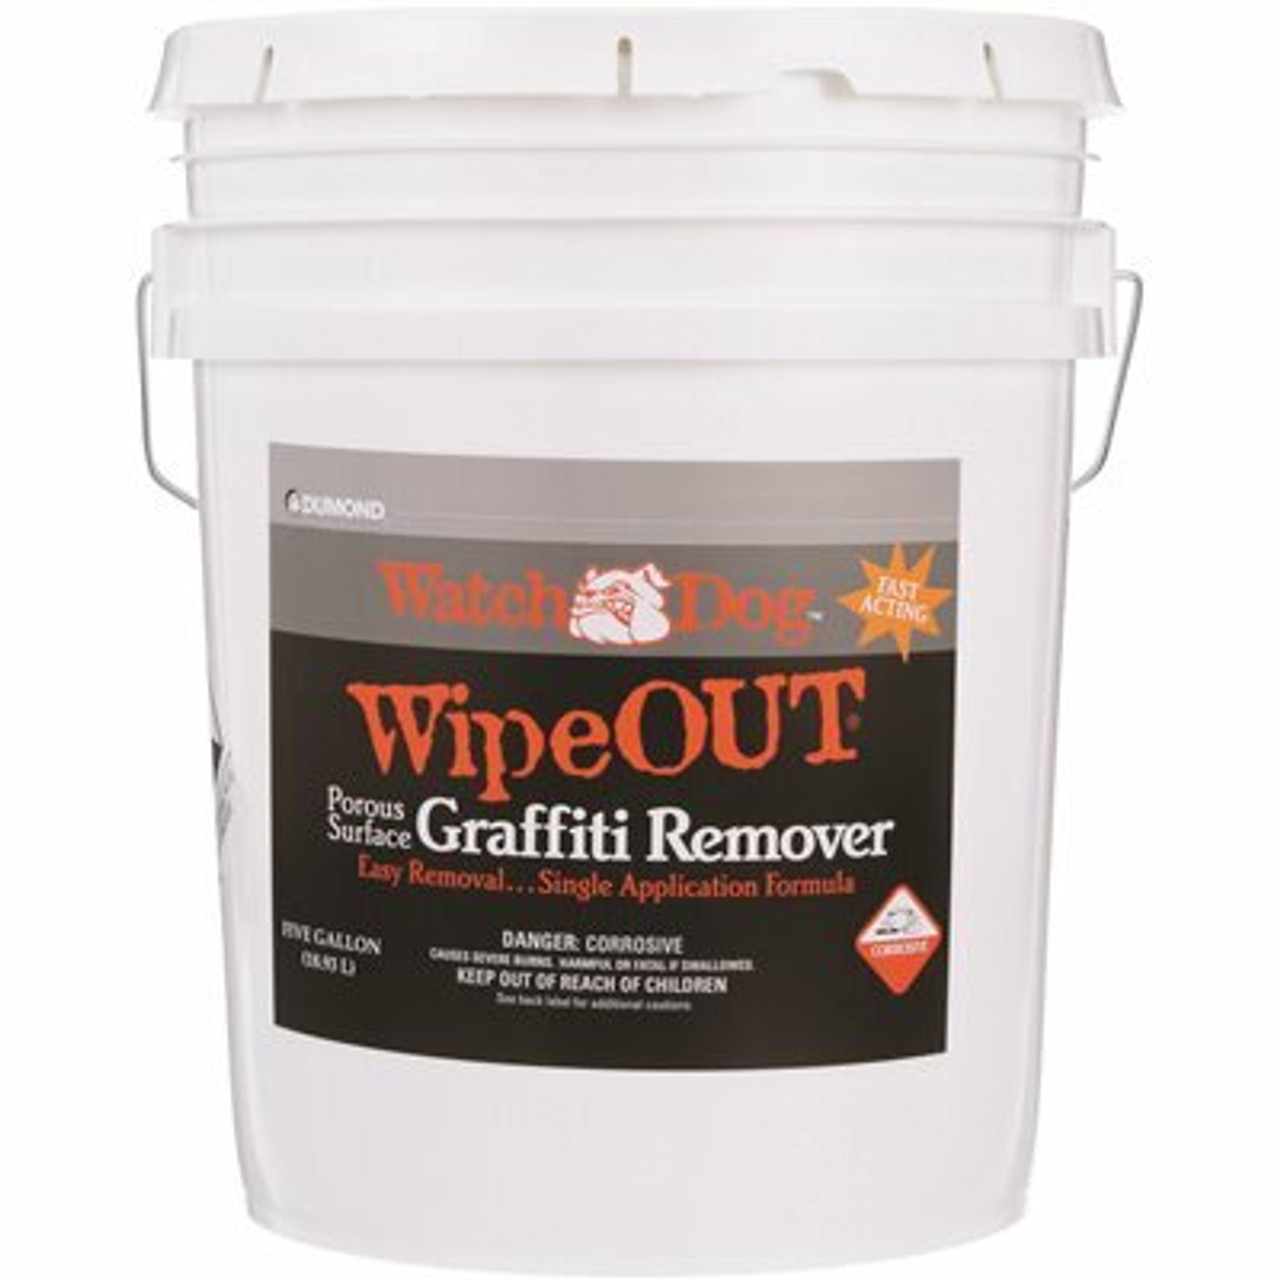 Watch Dog 5 Gal. Wipe Out Porous Surface Graffiti Remover